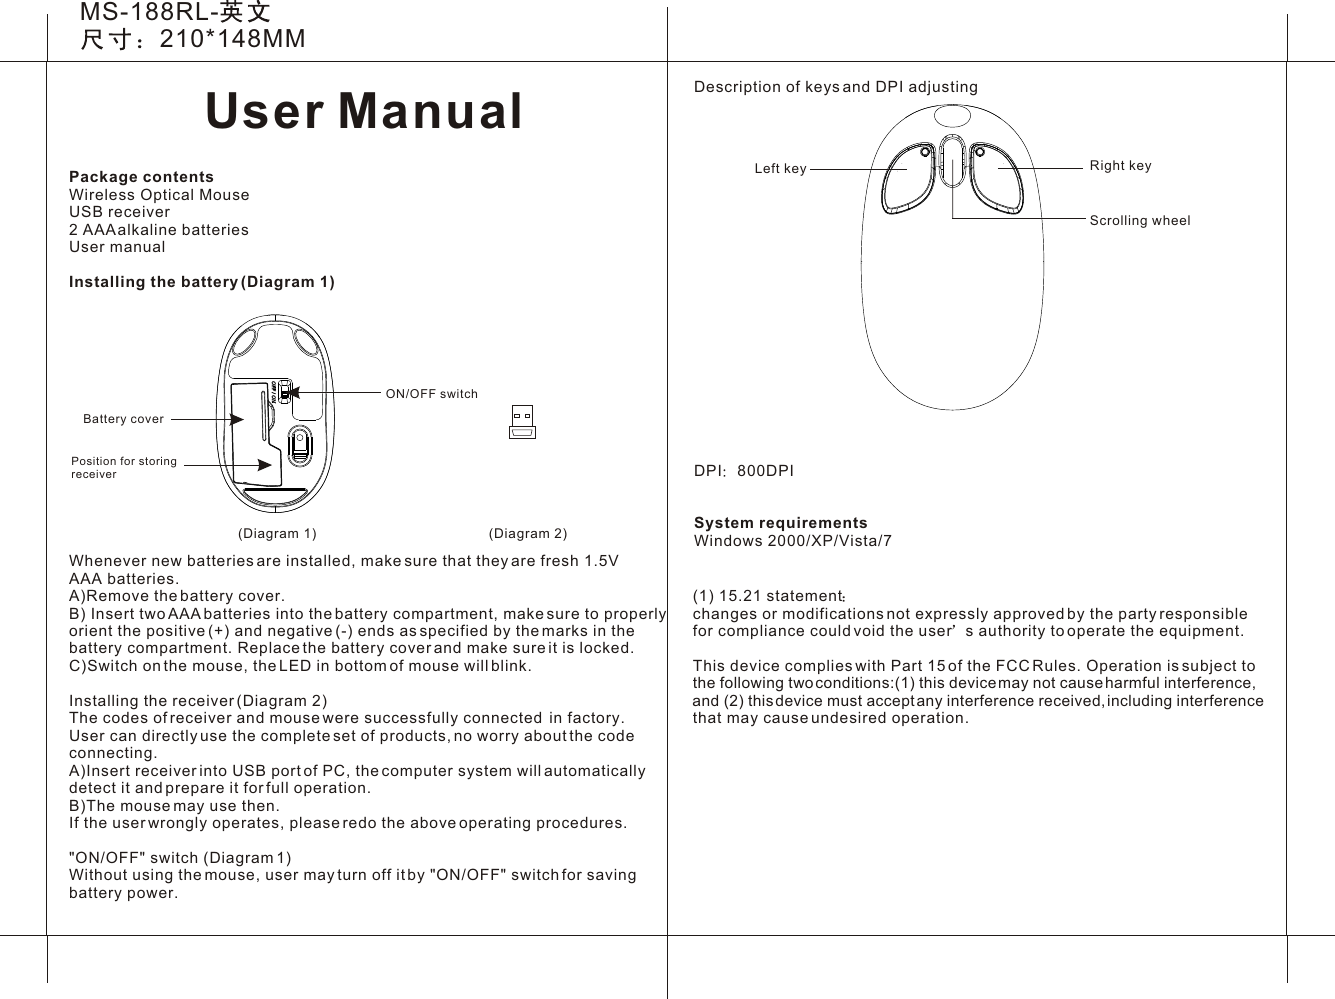 User ManualMS-188RL-210*148MM(Diagram 1)Description of keys and DPI adjustingDPI 800DPISystem requirementsWindows 2000/XP/Vista/7 Scrolling wheelLeft key Right key(Diagram 2)ON/OFF switchBattery coverPosition for storingreceiverPackage contentsWireless Optical MouseUSB receiver2 AAA alkaline batteriesUser manual Installing the battery (Diagram 1)Whenever new batteries are installed, make sure that they are fresh 1.5V AAA batteries.A)Remove the battery cover.B) Insert two AAA batteries into the battery compartment, make sure to properly orient the positive (+) and negative (-) ends as specified by the marks in the battery compartment. Replace the battery cover and make sure it is locked.C)Switch on the mouse, the LED in bottom of mouse will blink.Installing the receiver (Diagram 2)The codes of receiver and mouse were successfully connected  in factory. User can directly use the complete set of products, no worry about the code connecting. A)Insert receiver into USB port of PC, the computer system will automatically detect it and prepare it for full operation.B)The mouse may use then.If the user wrongly operates, please redo the above operating procedures.&quot;ON/OFF&quot; switch (Diagram 1)Without using the mouse, user may turn off it by &quot;ON/OFF&quot; switch for saving battery power.(1) 15.21 statement  changes or modifications not expressly approved by the party responsible for compliance could void the user s authority to operate the equipment. This device complies with Part 15 of the FCC Rules. Operation is subject to the following two conditions:(1) this device may not cause harmful interference, and (2) this device must accept any interference received, including interference that may cause undesired operation. 